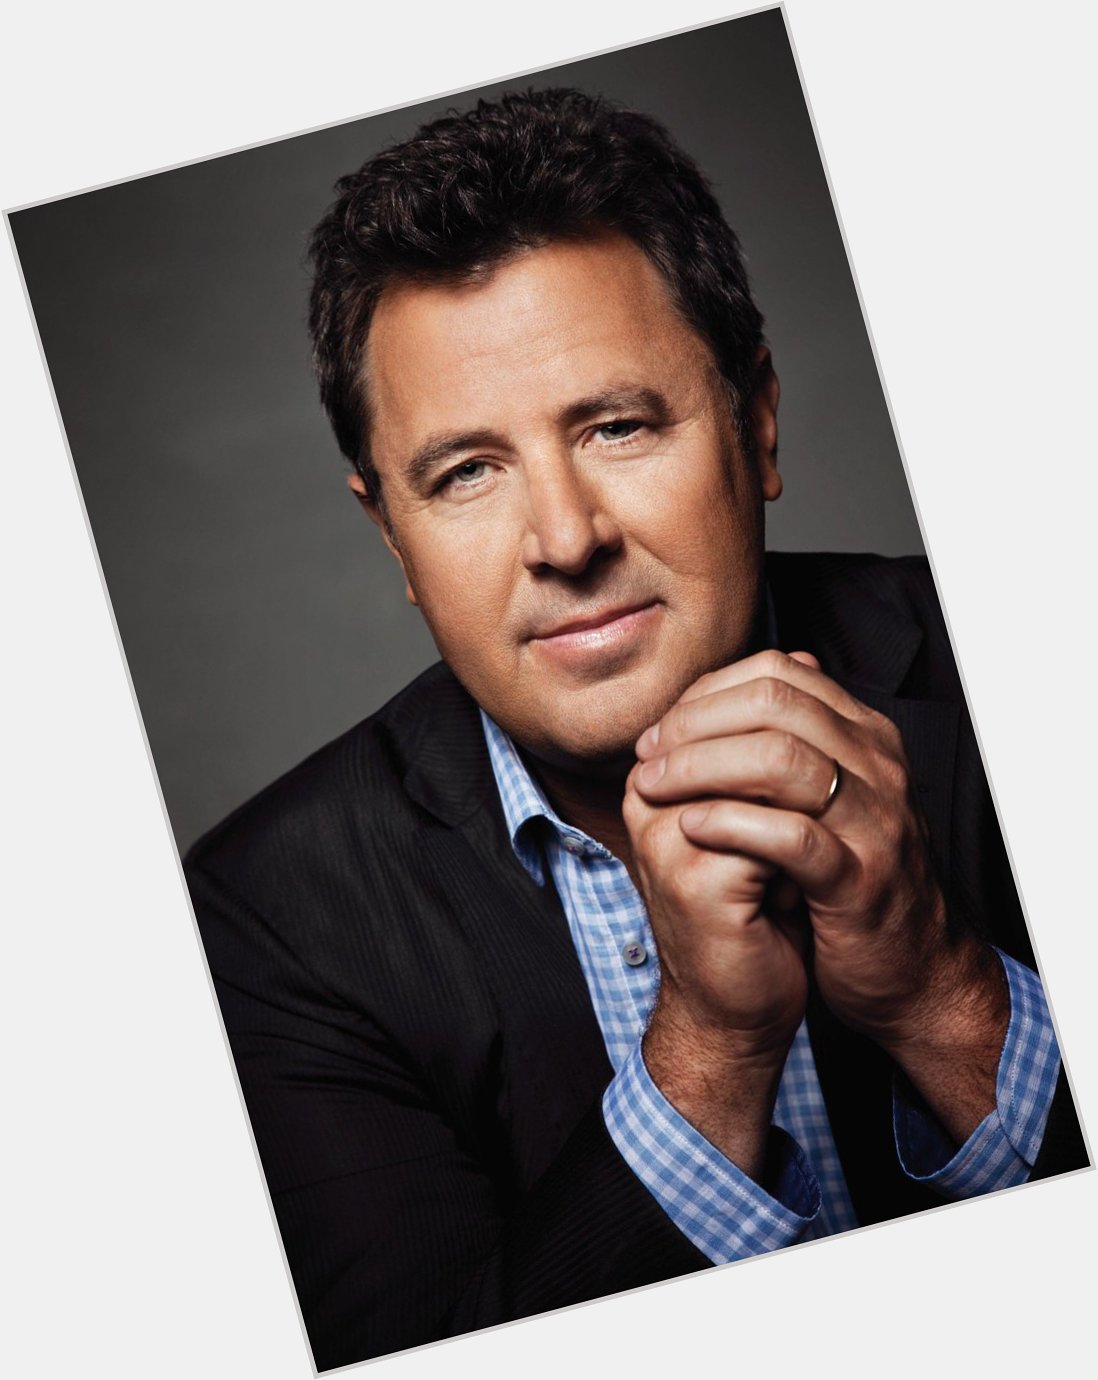 Happy Birthday Vince Gill. He is such an amazing talent and even better person! 